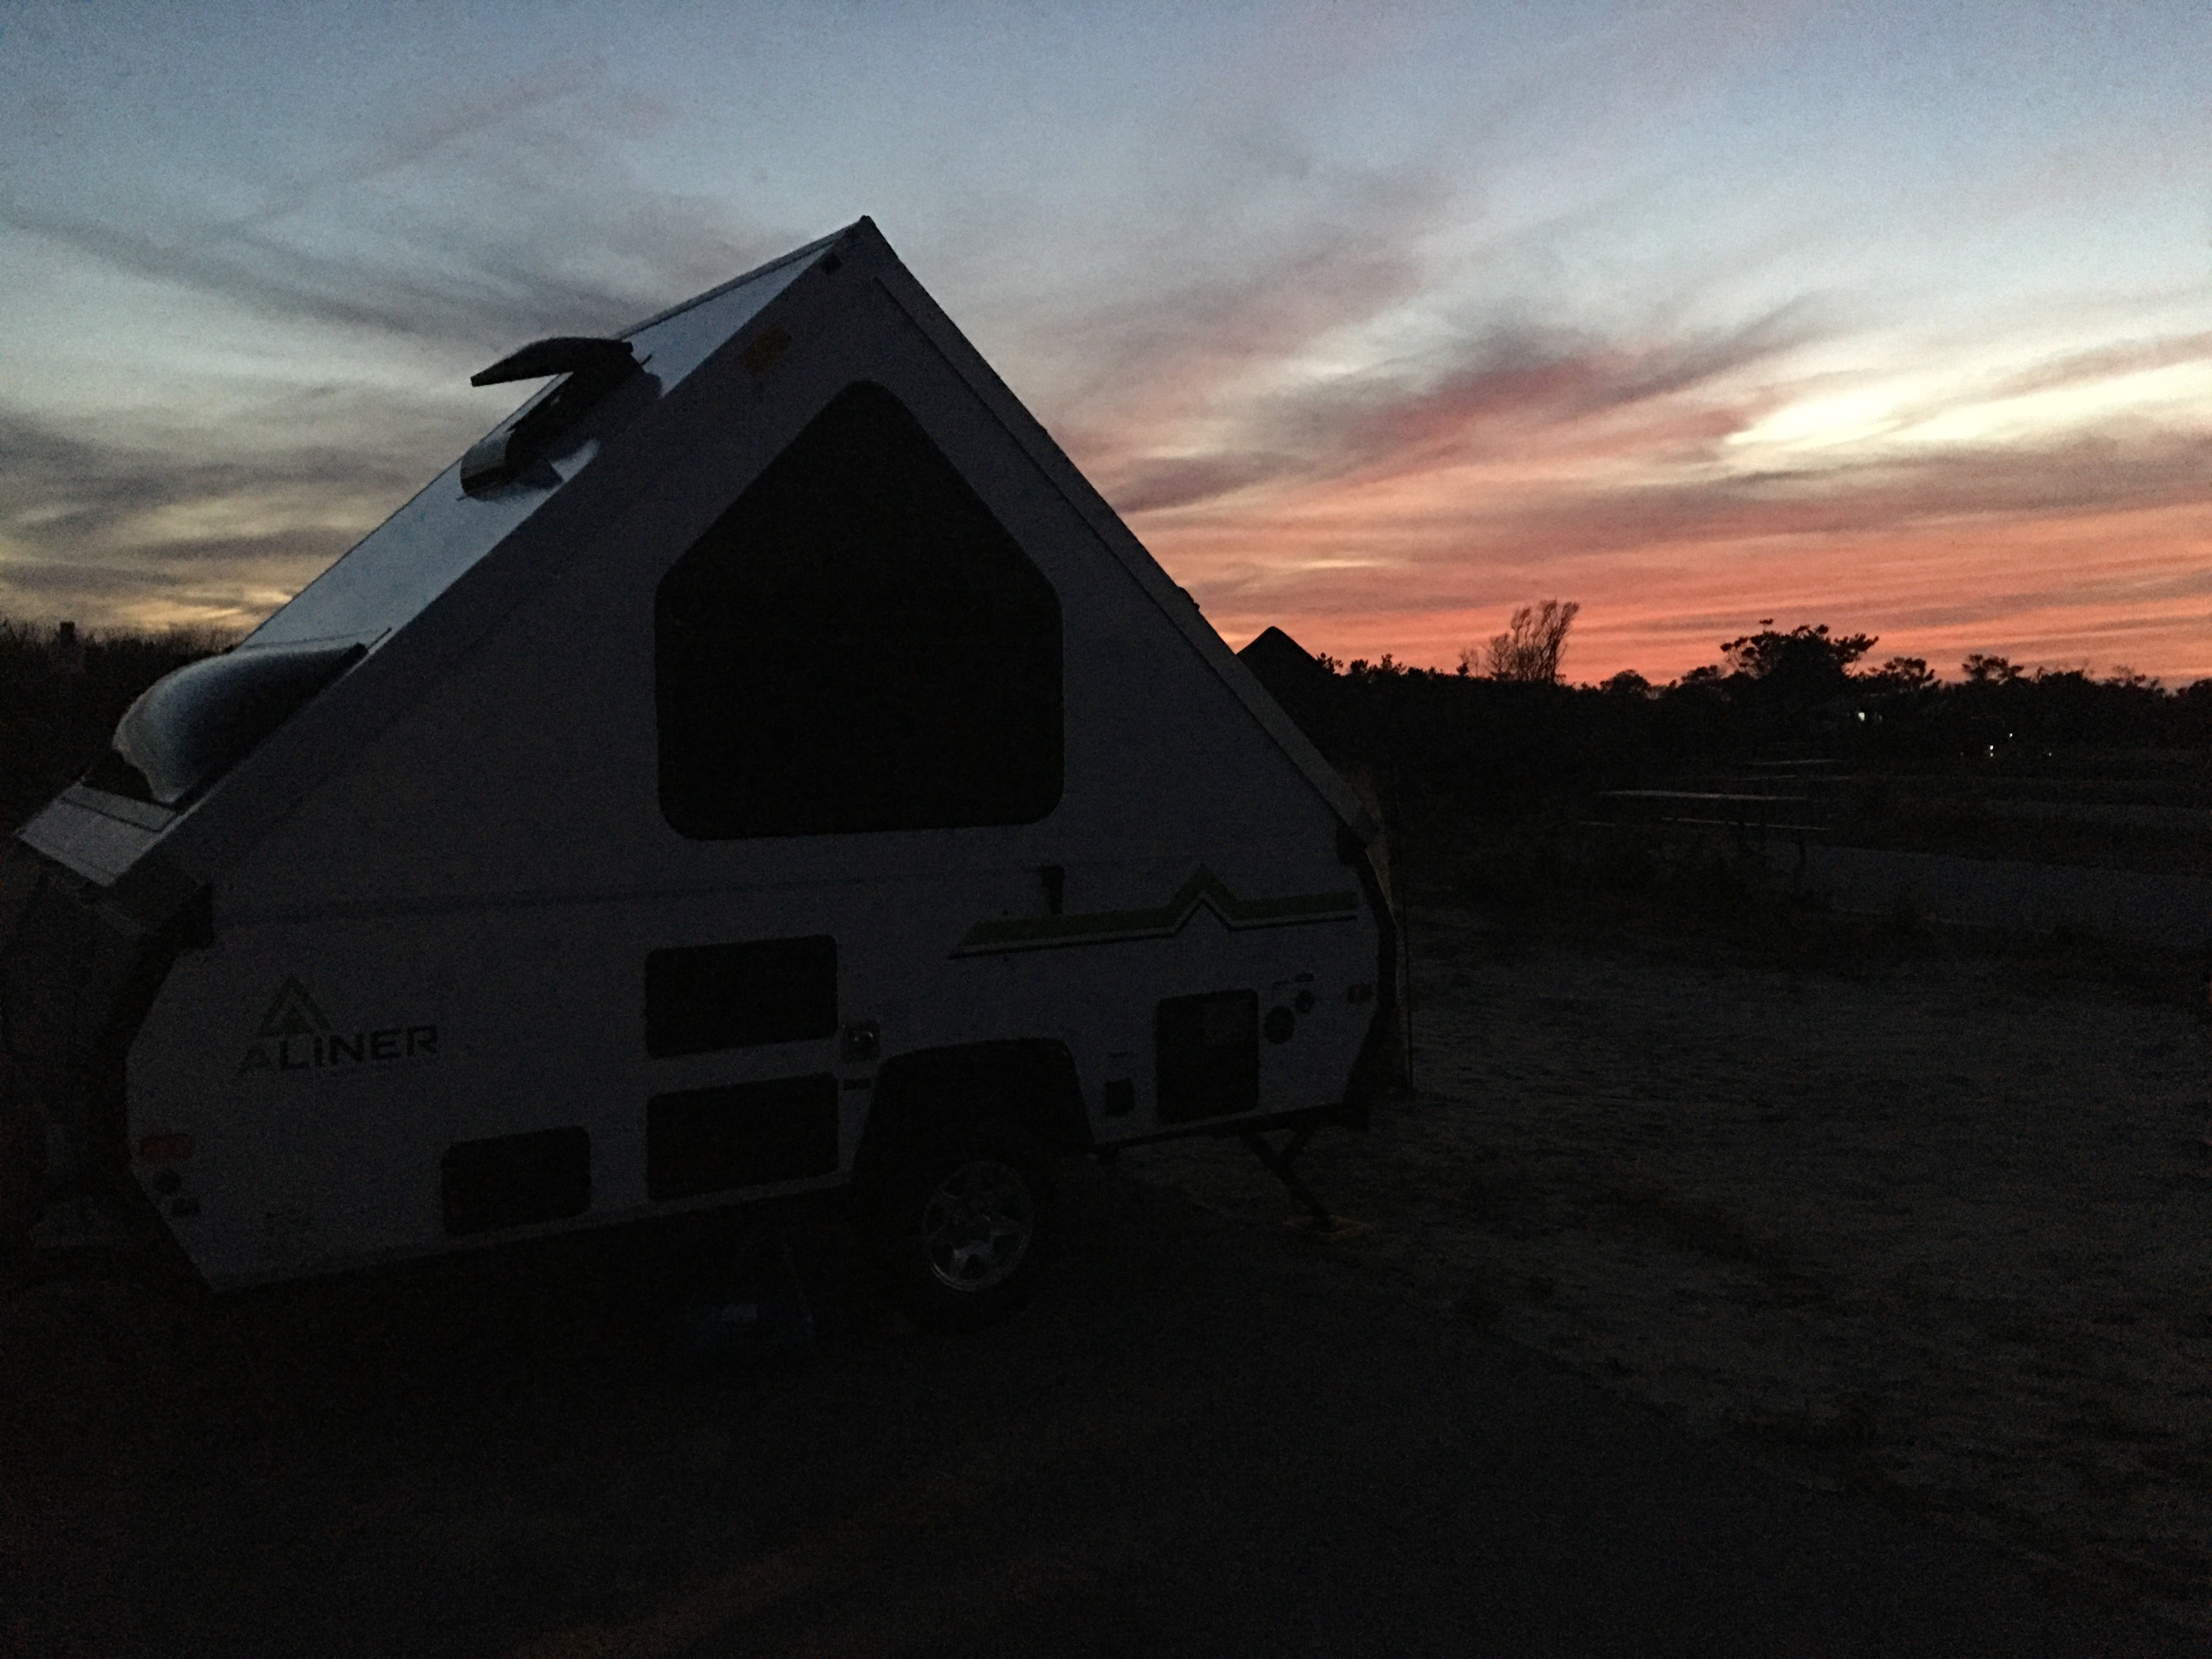 Our site at sunset